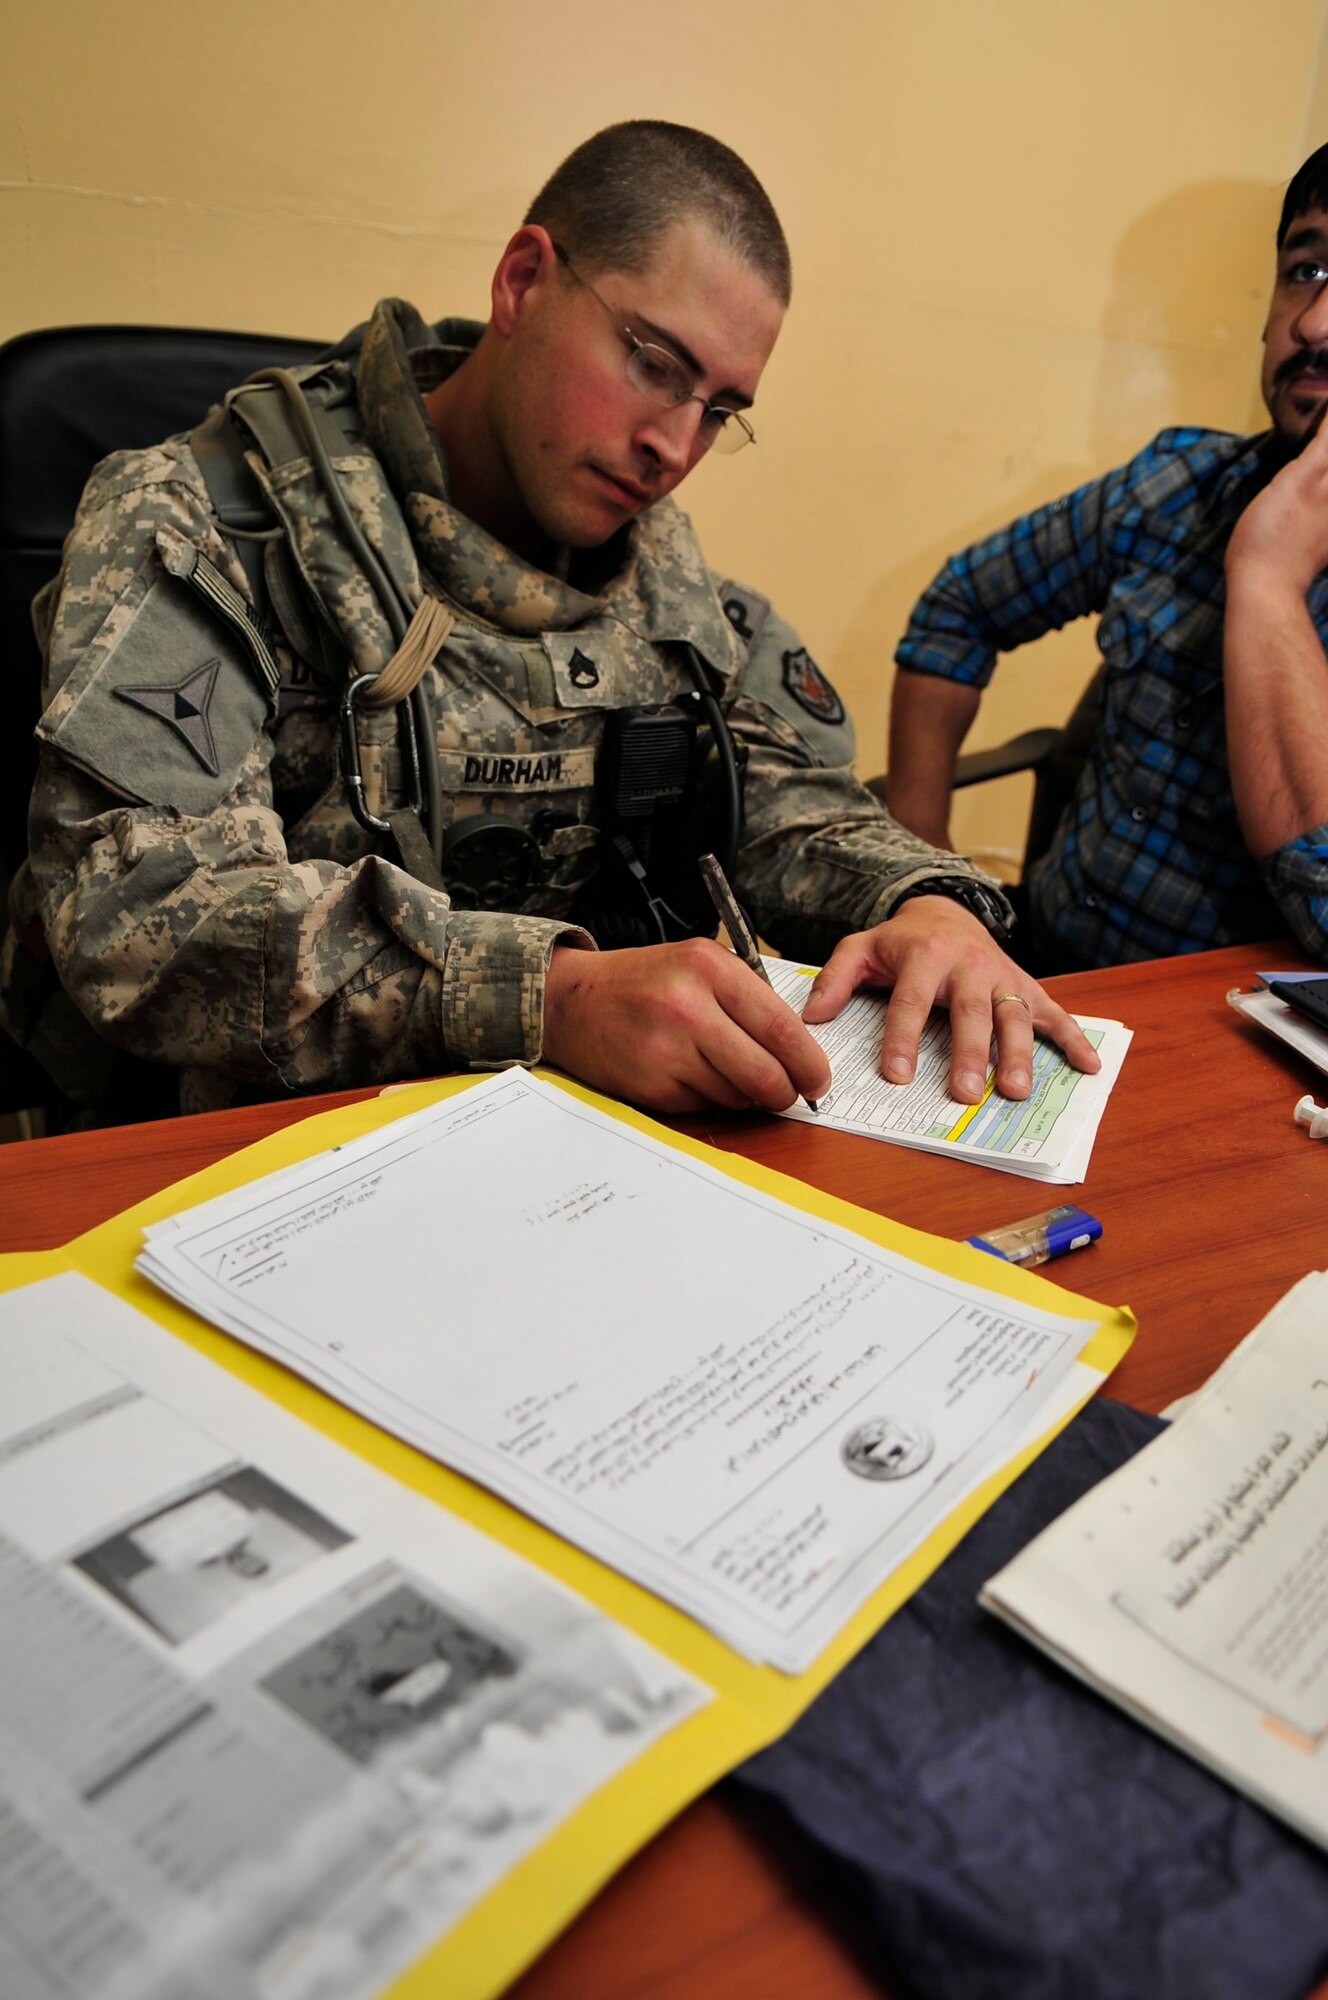 U.S. Army Staff Sgt. Benjamin Durham, U.S. Forces – Iraq provost marshal office corrections assistance transition team force protection assessor, reviews records kept inside the mental health clinic at a prison in Baghdad’s Rusafa Prison Complex, April 6, 2011. Sergeant Durham is conducting an assessment of conditions at the facility. (U.S. Air Force photo by Senior Master Sgt. Larry A. Schneck)